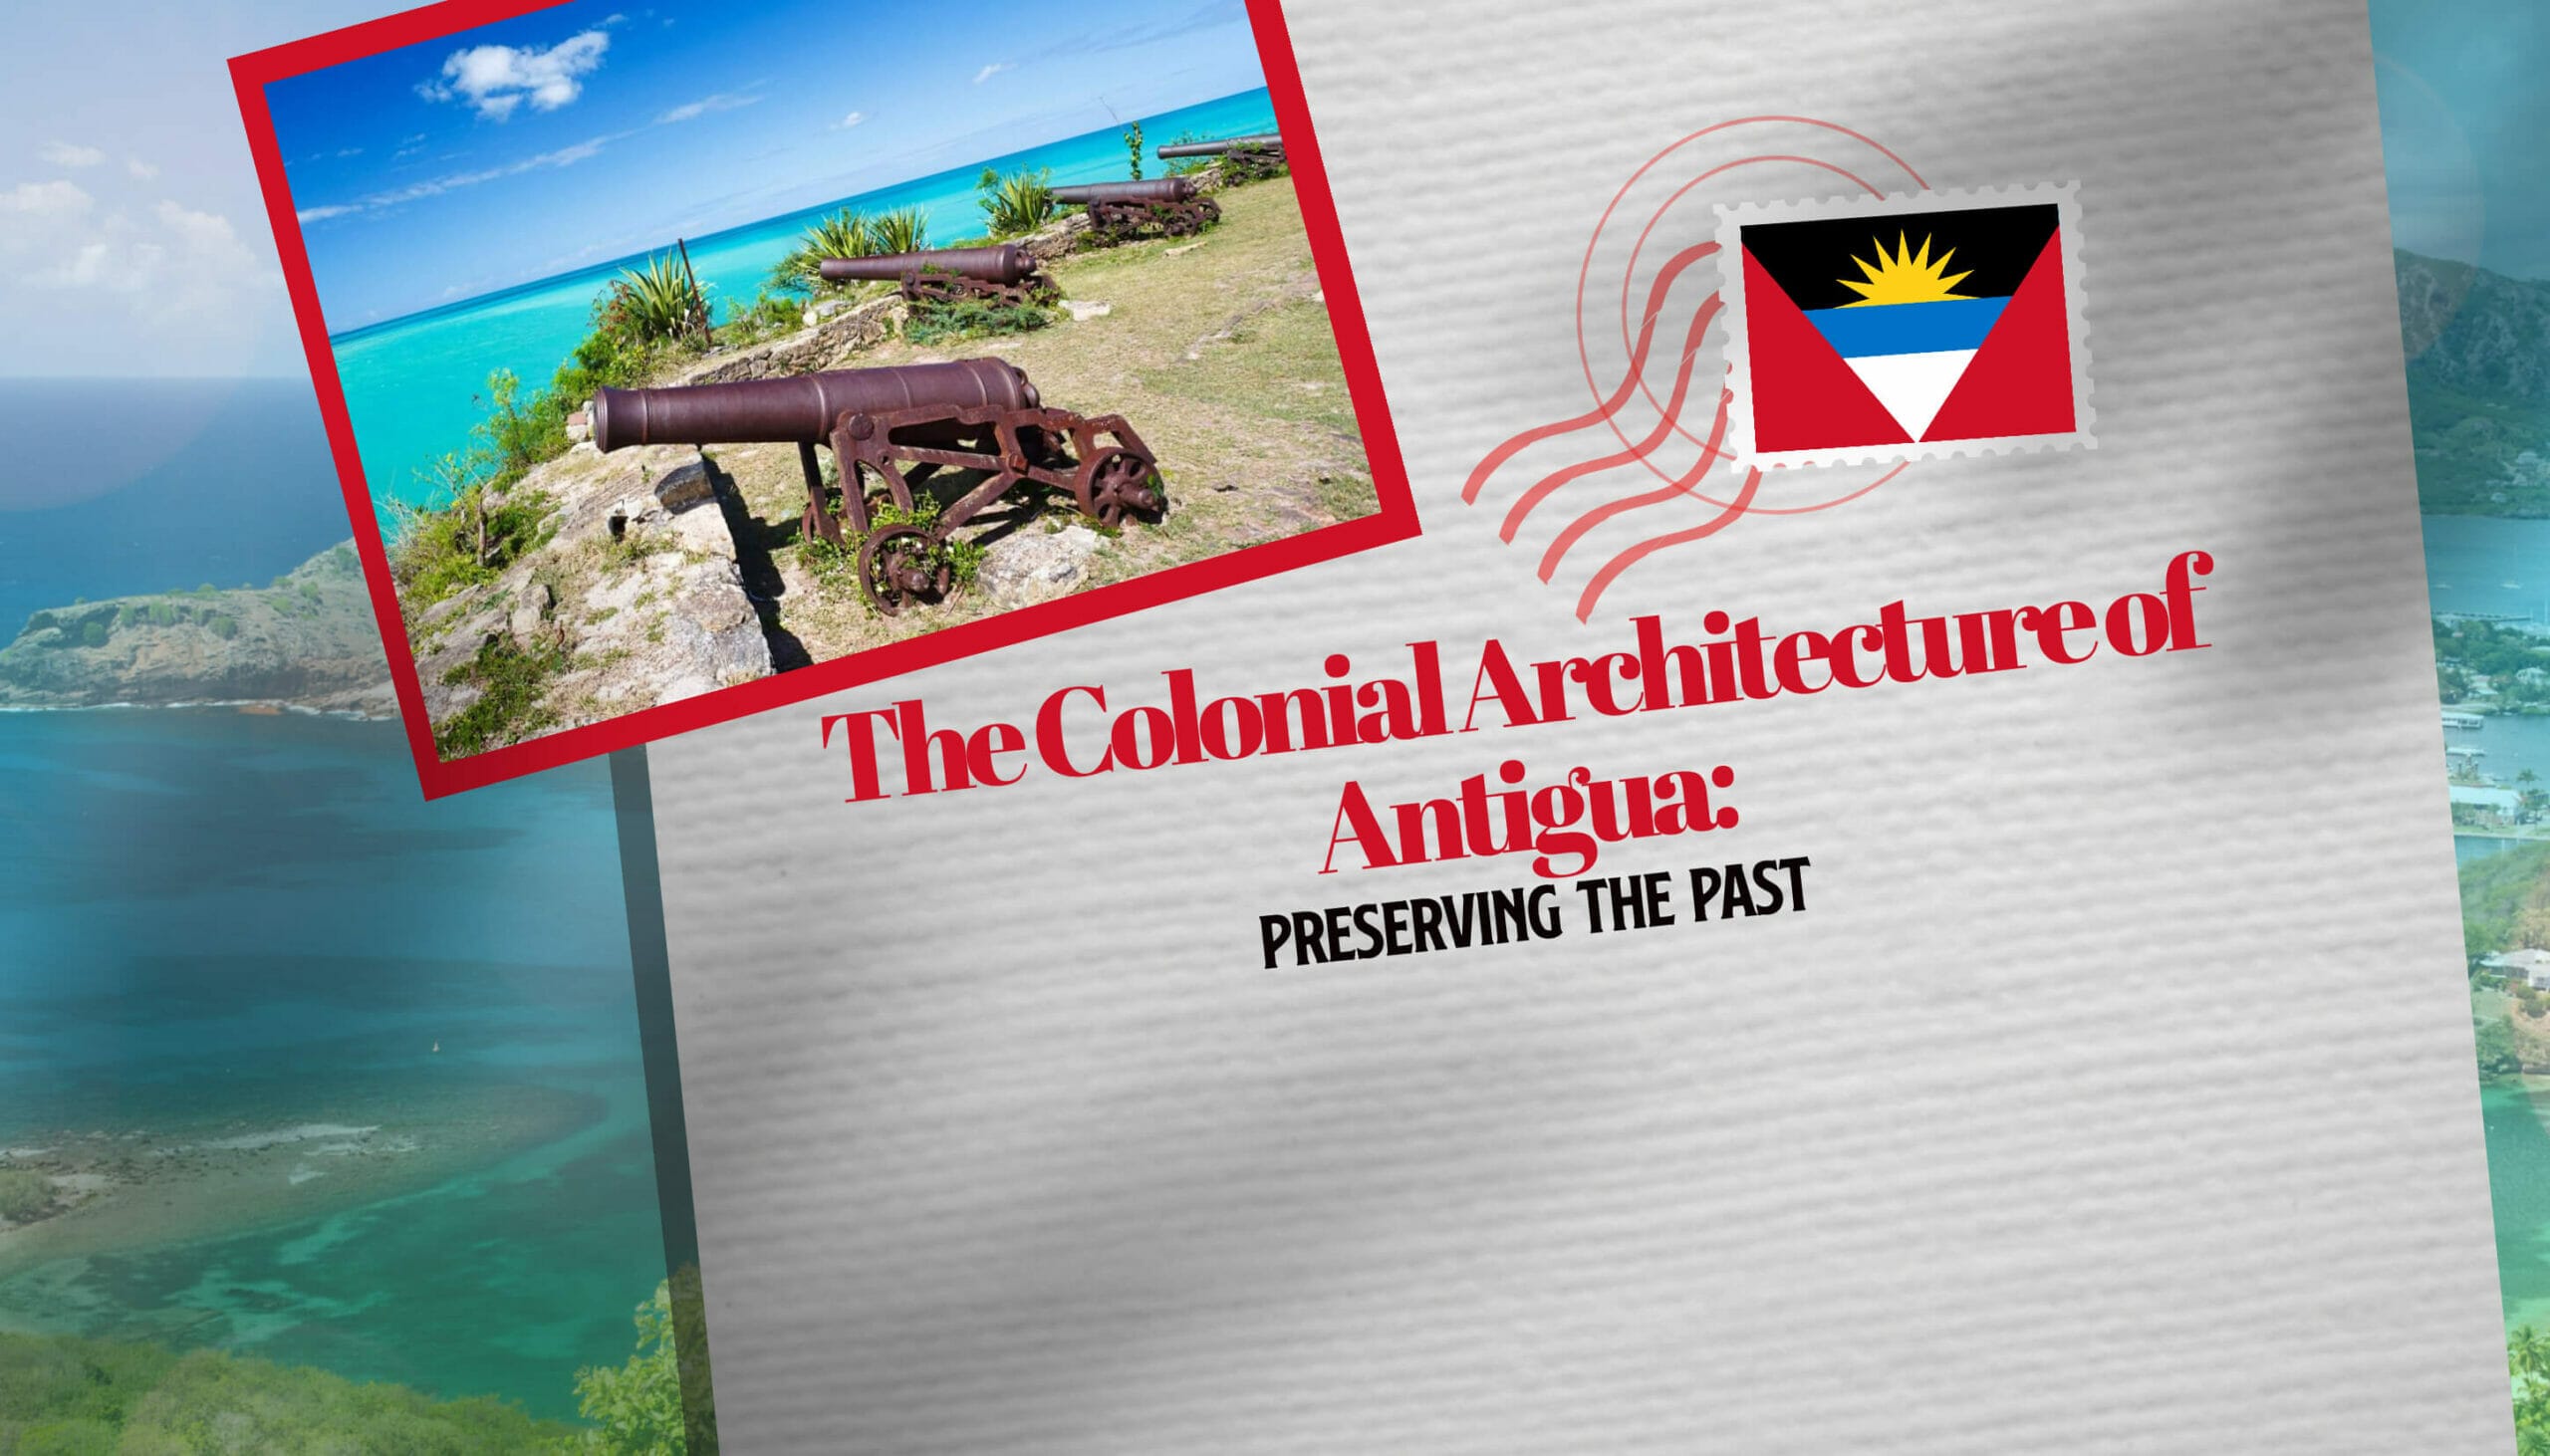 The Colonial Architecture of Antigua Preserving the Past